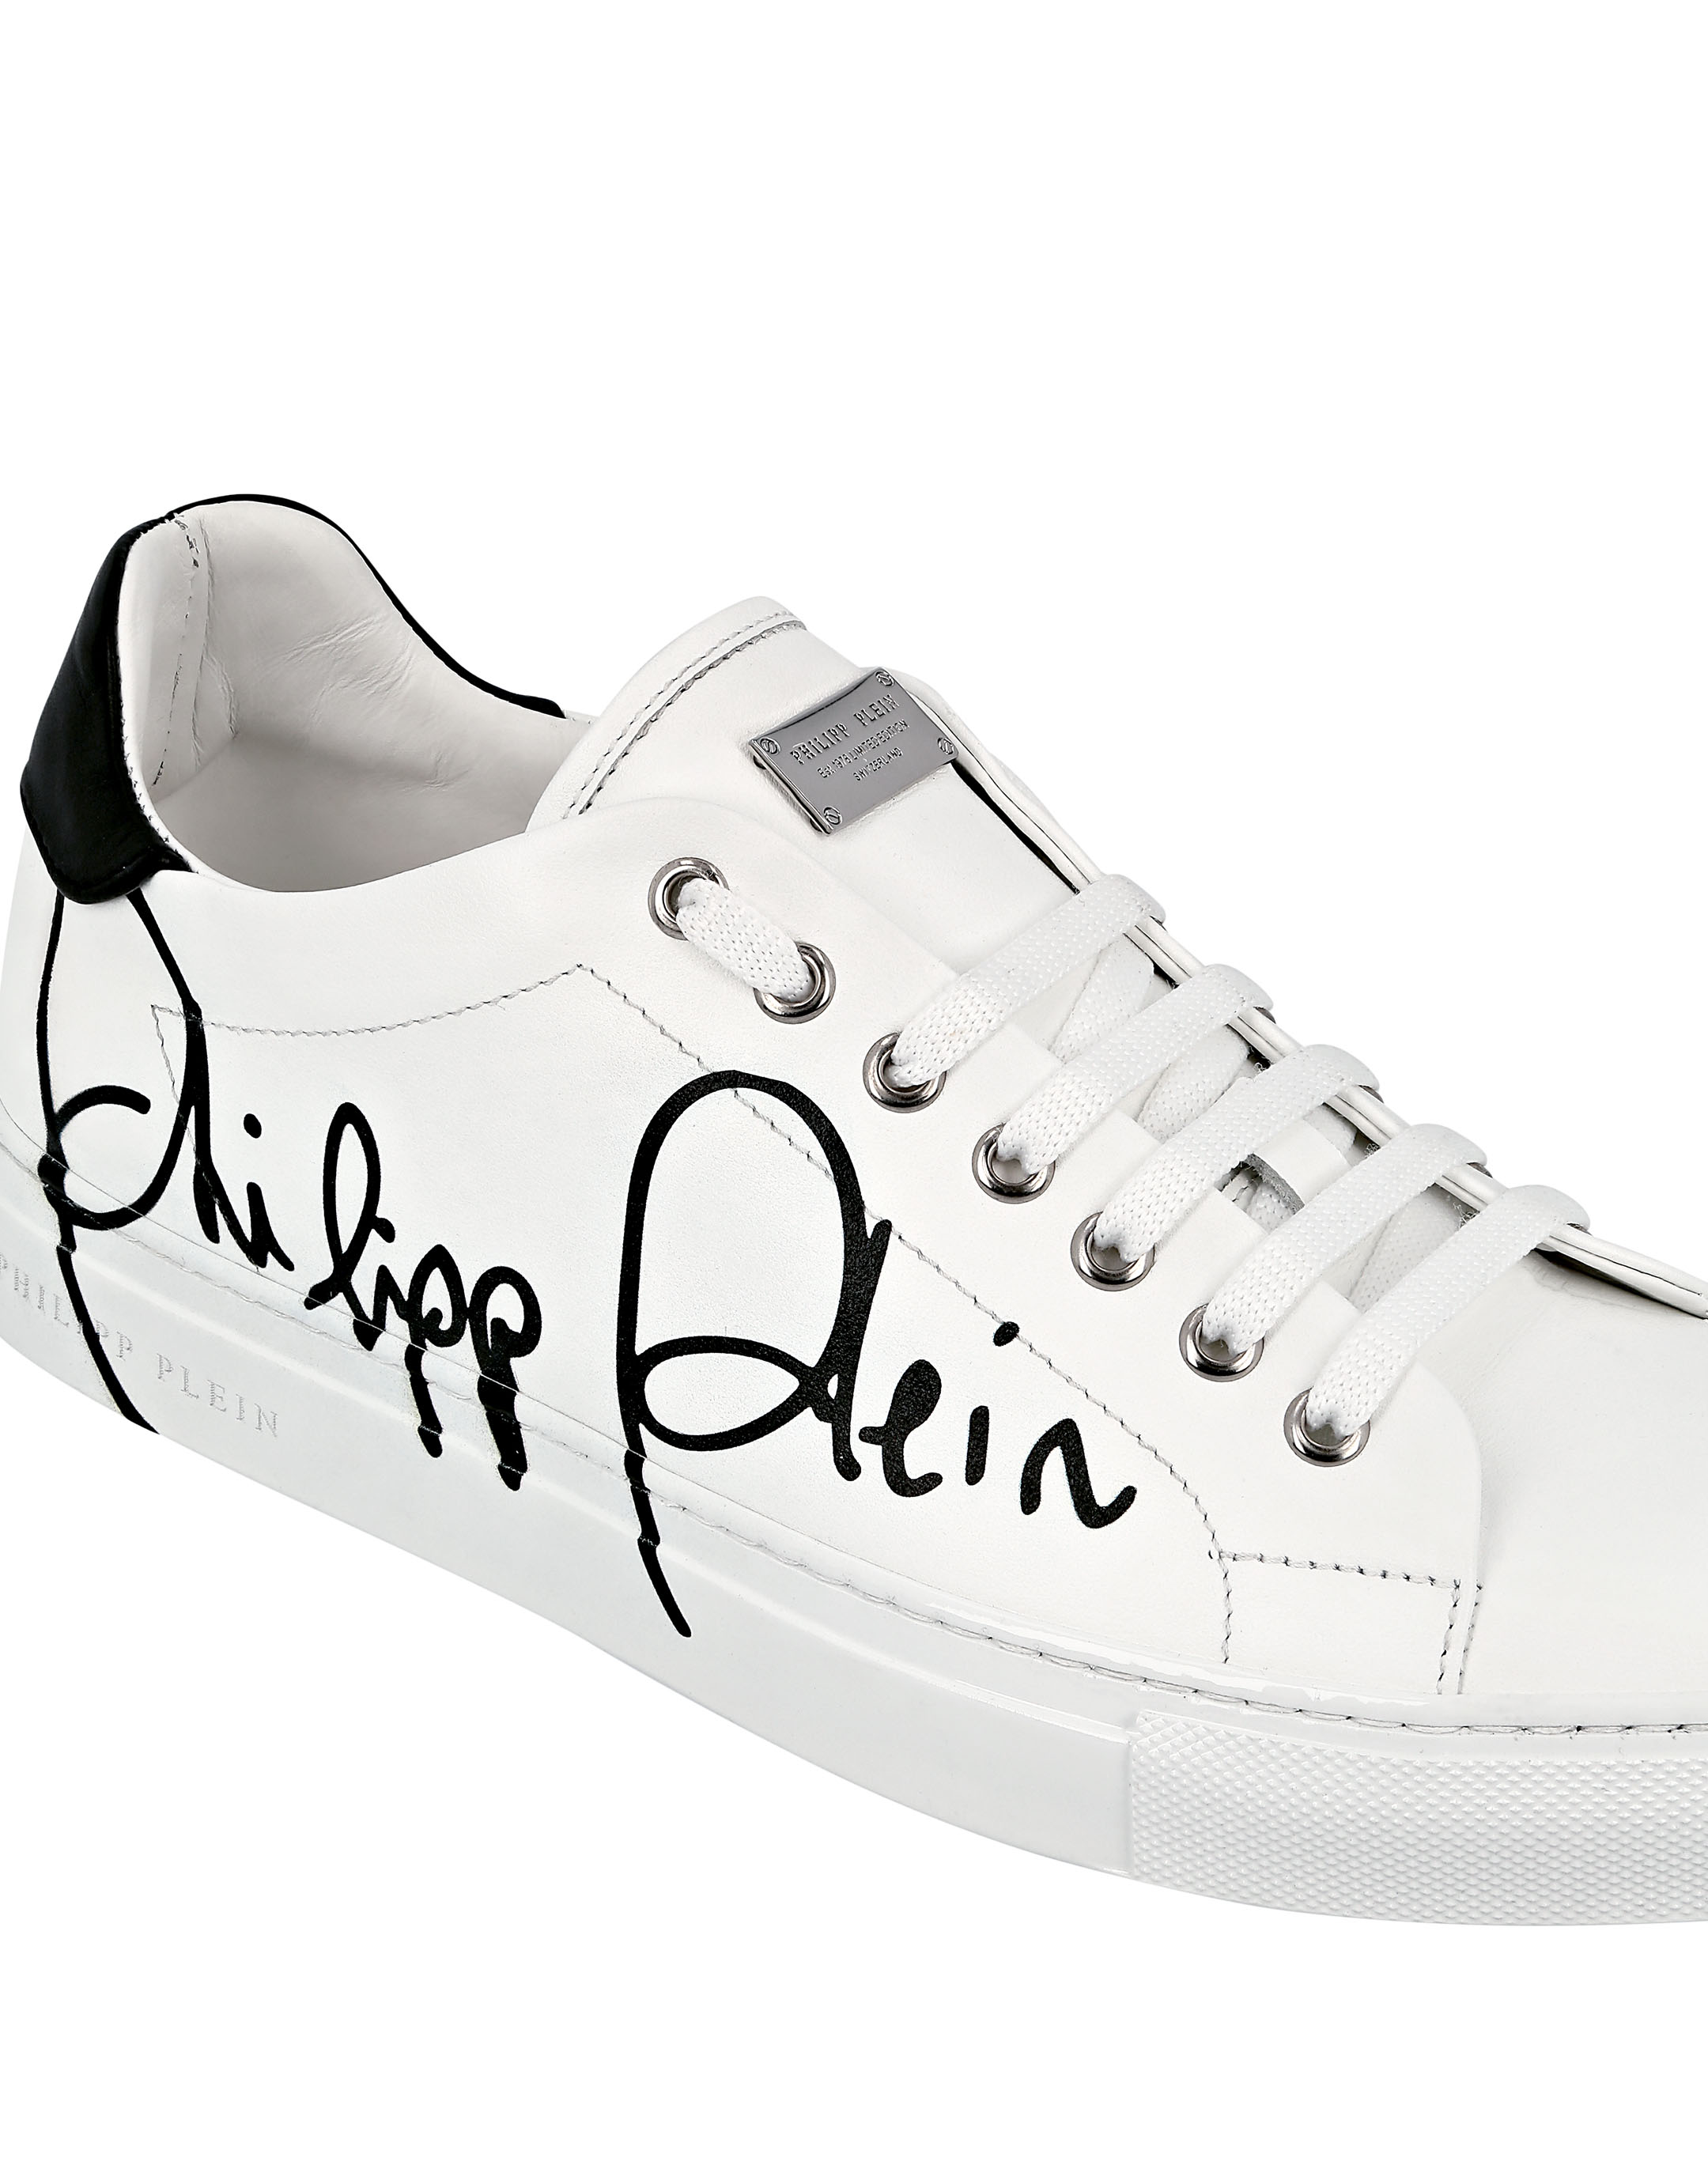 Lo-Top Sneakers Signature Edition | Philipp Plein Outlet